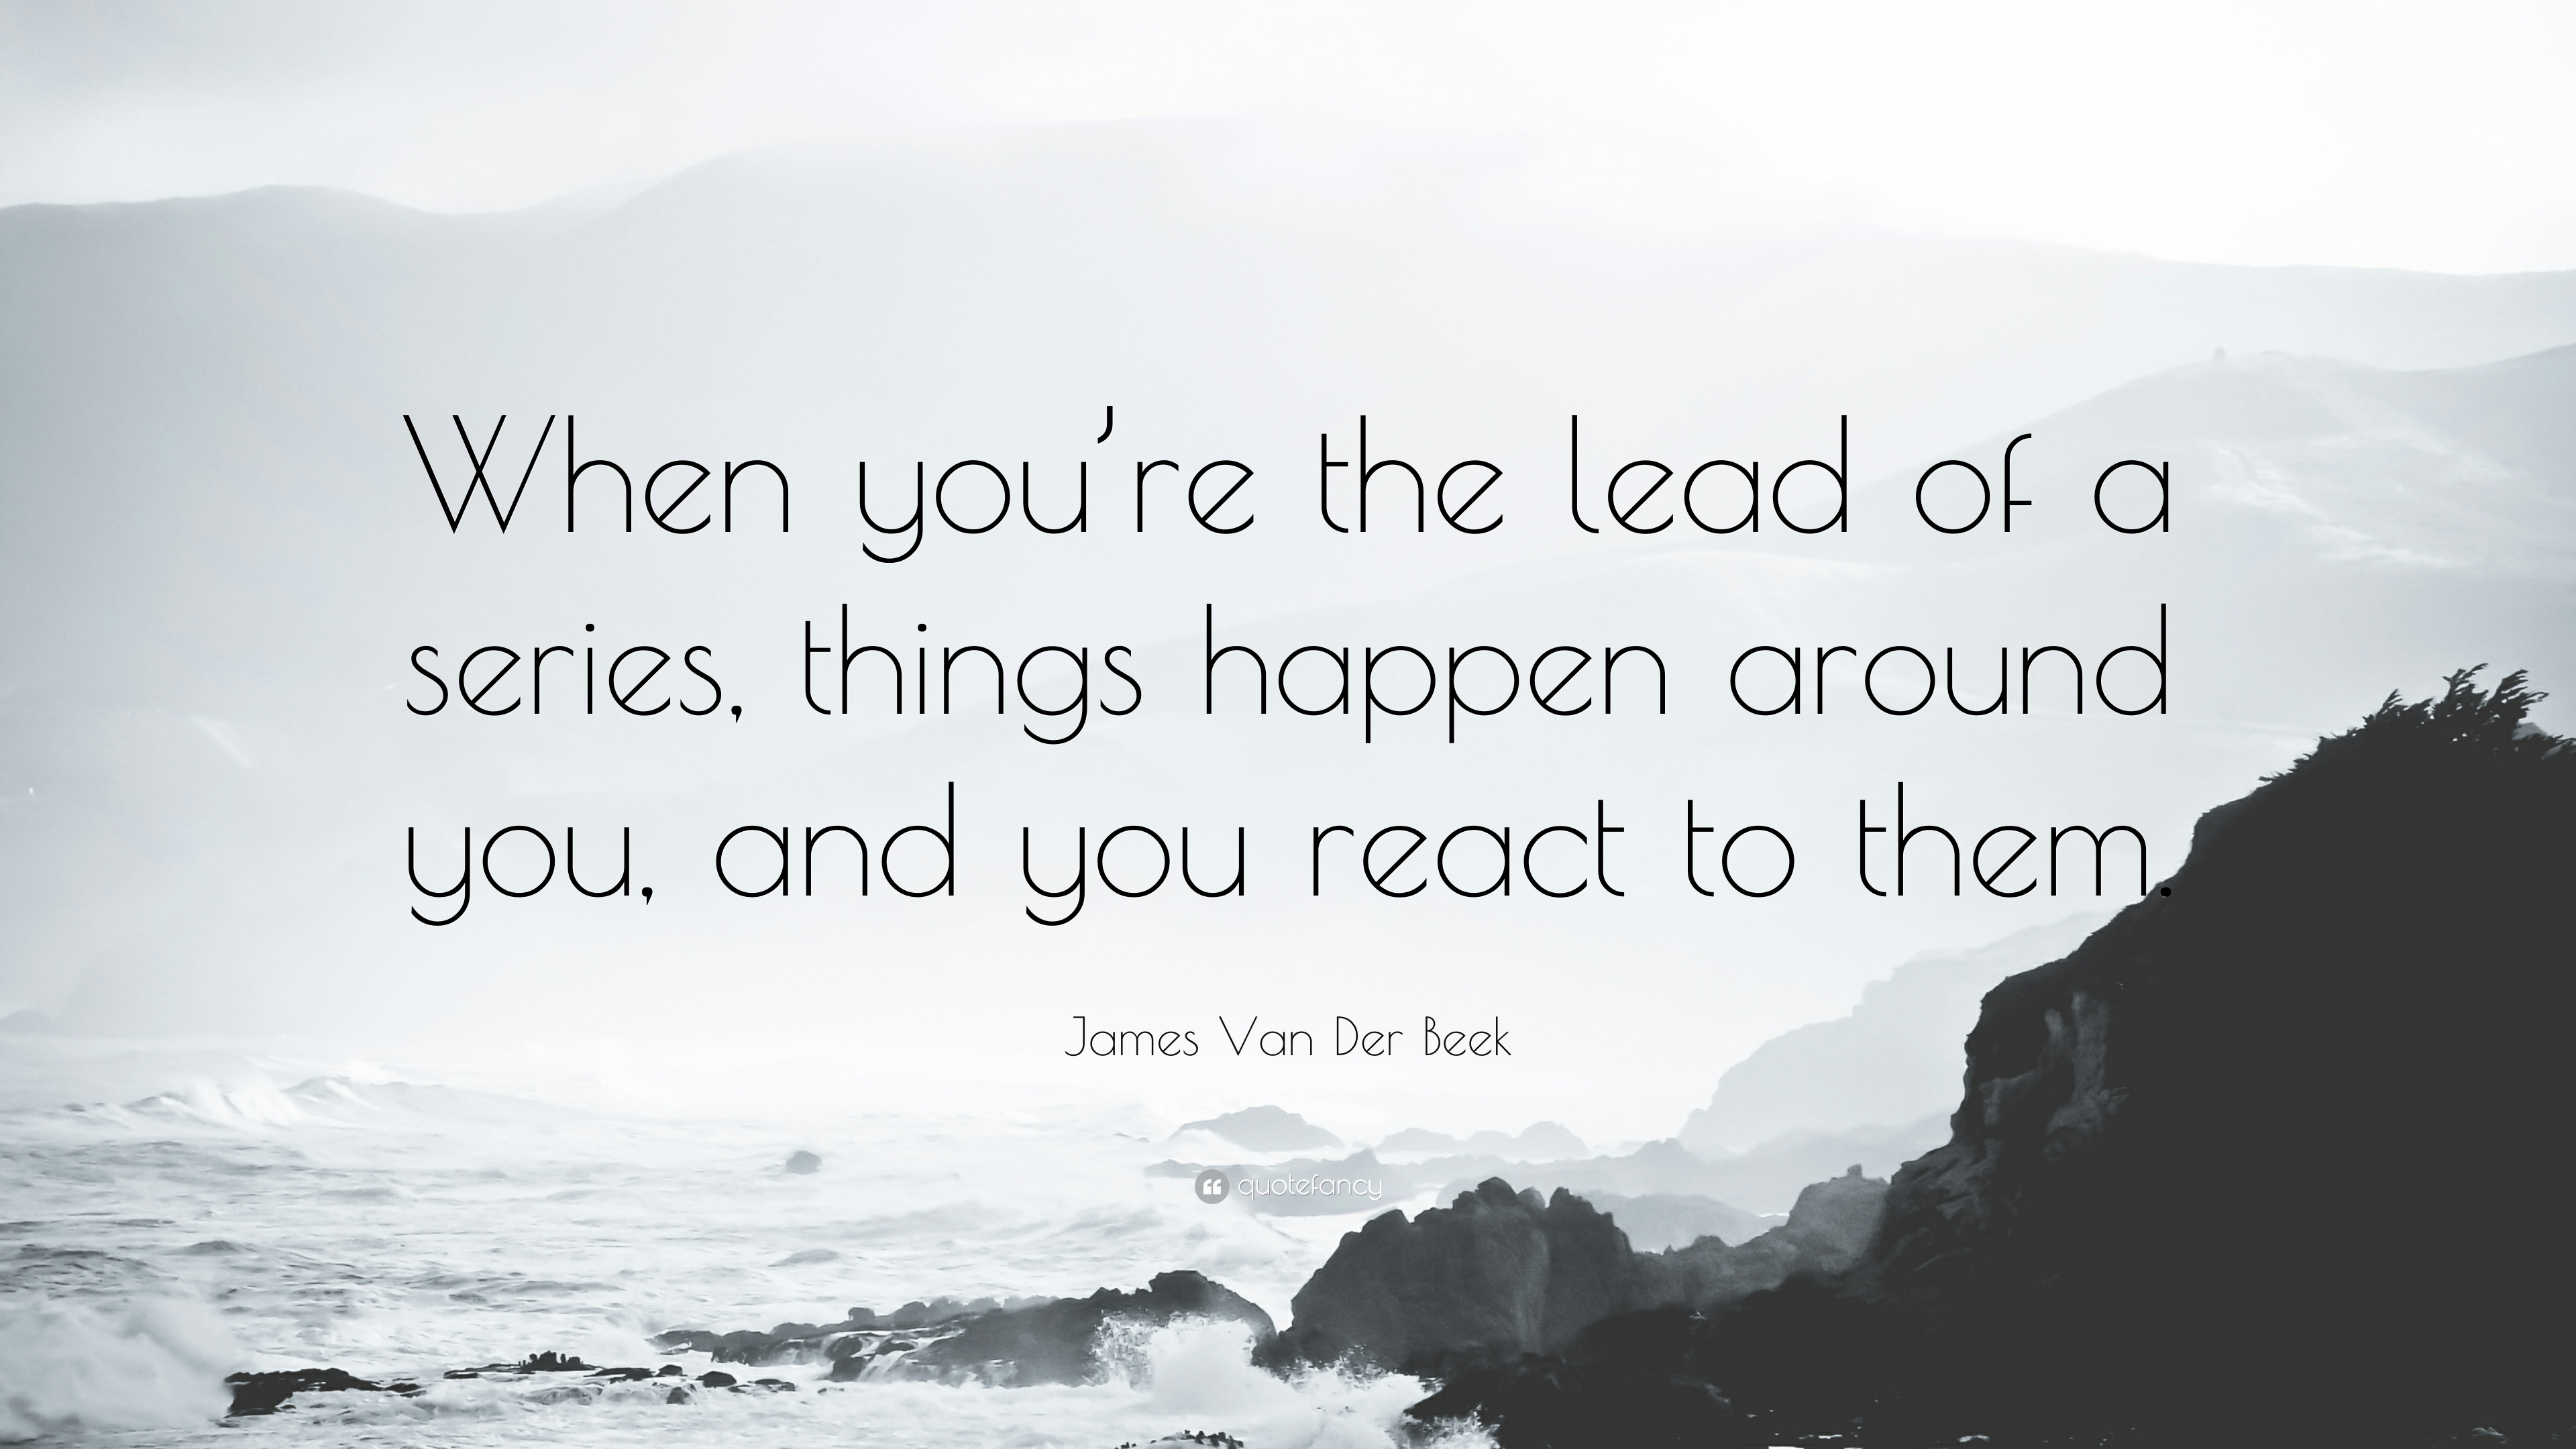 James Van Der Beek Quote: “When you're the lead of a series